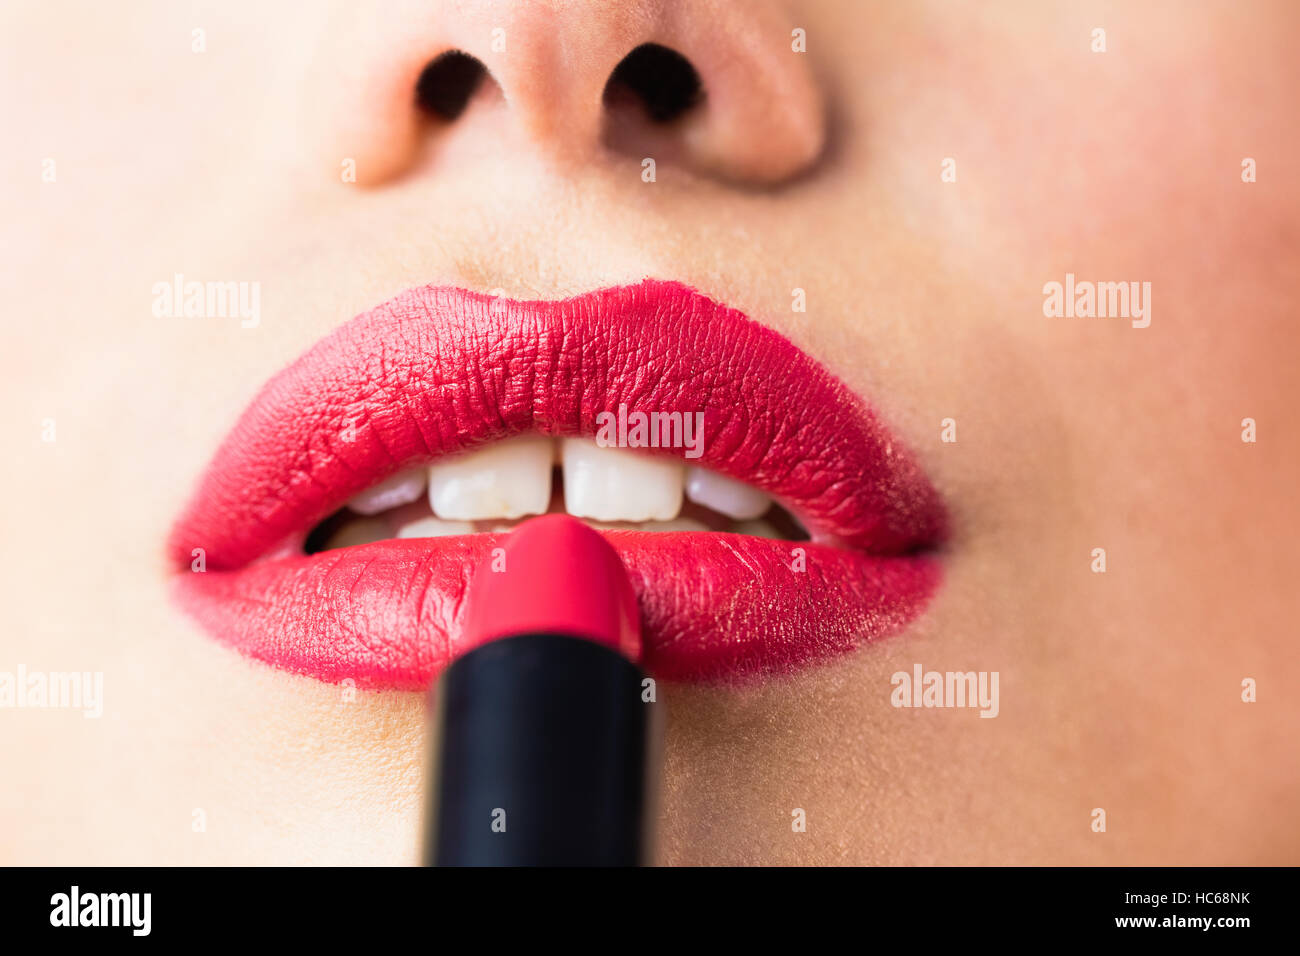 Beautiful woman applying red lipstick on lips against black background Stock Photo